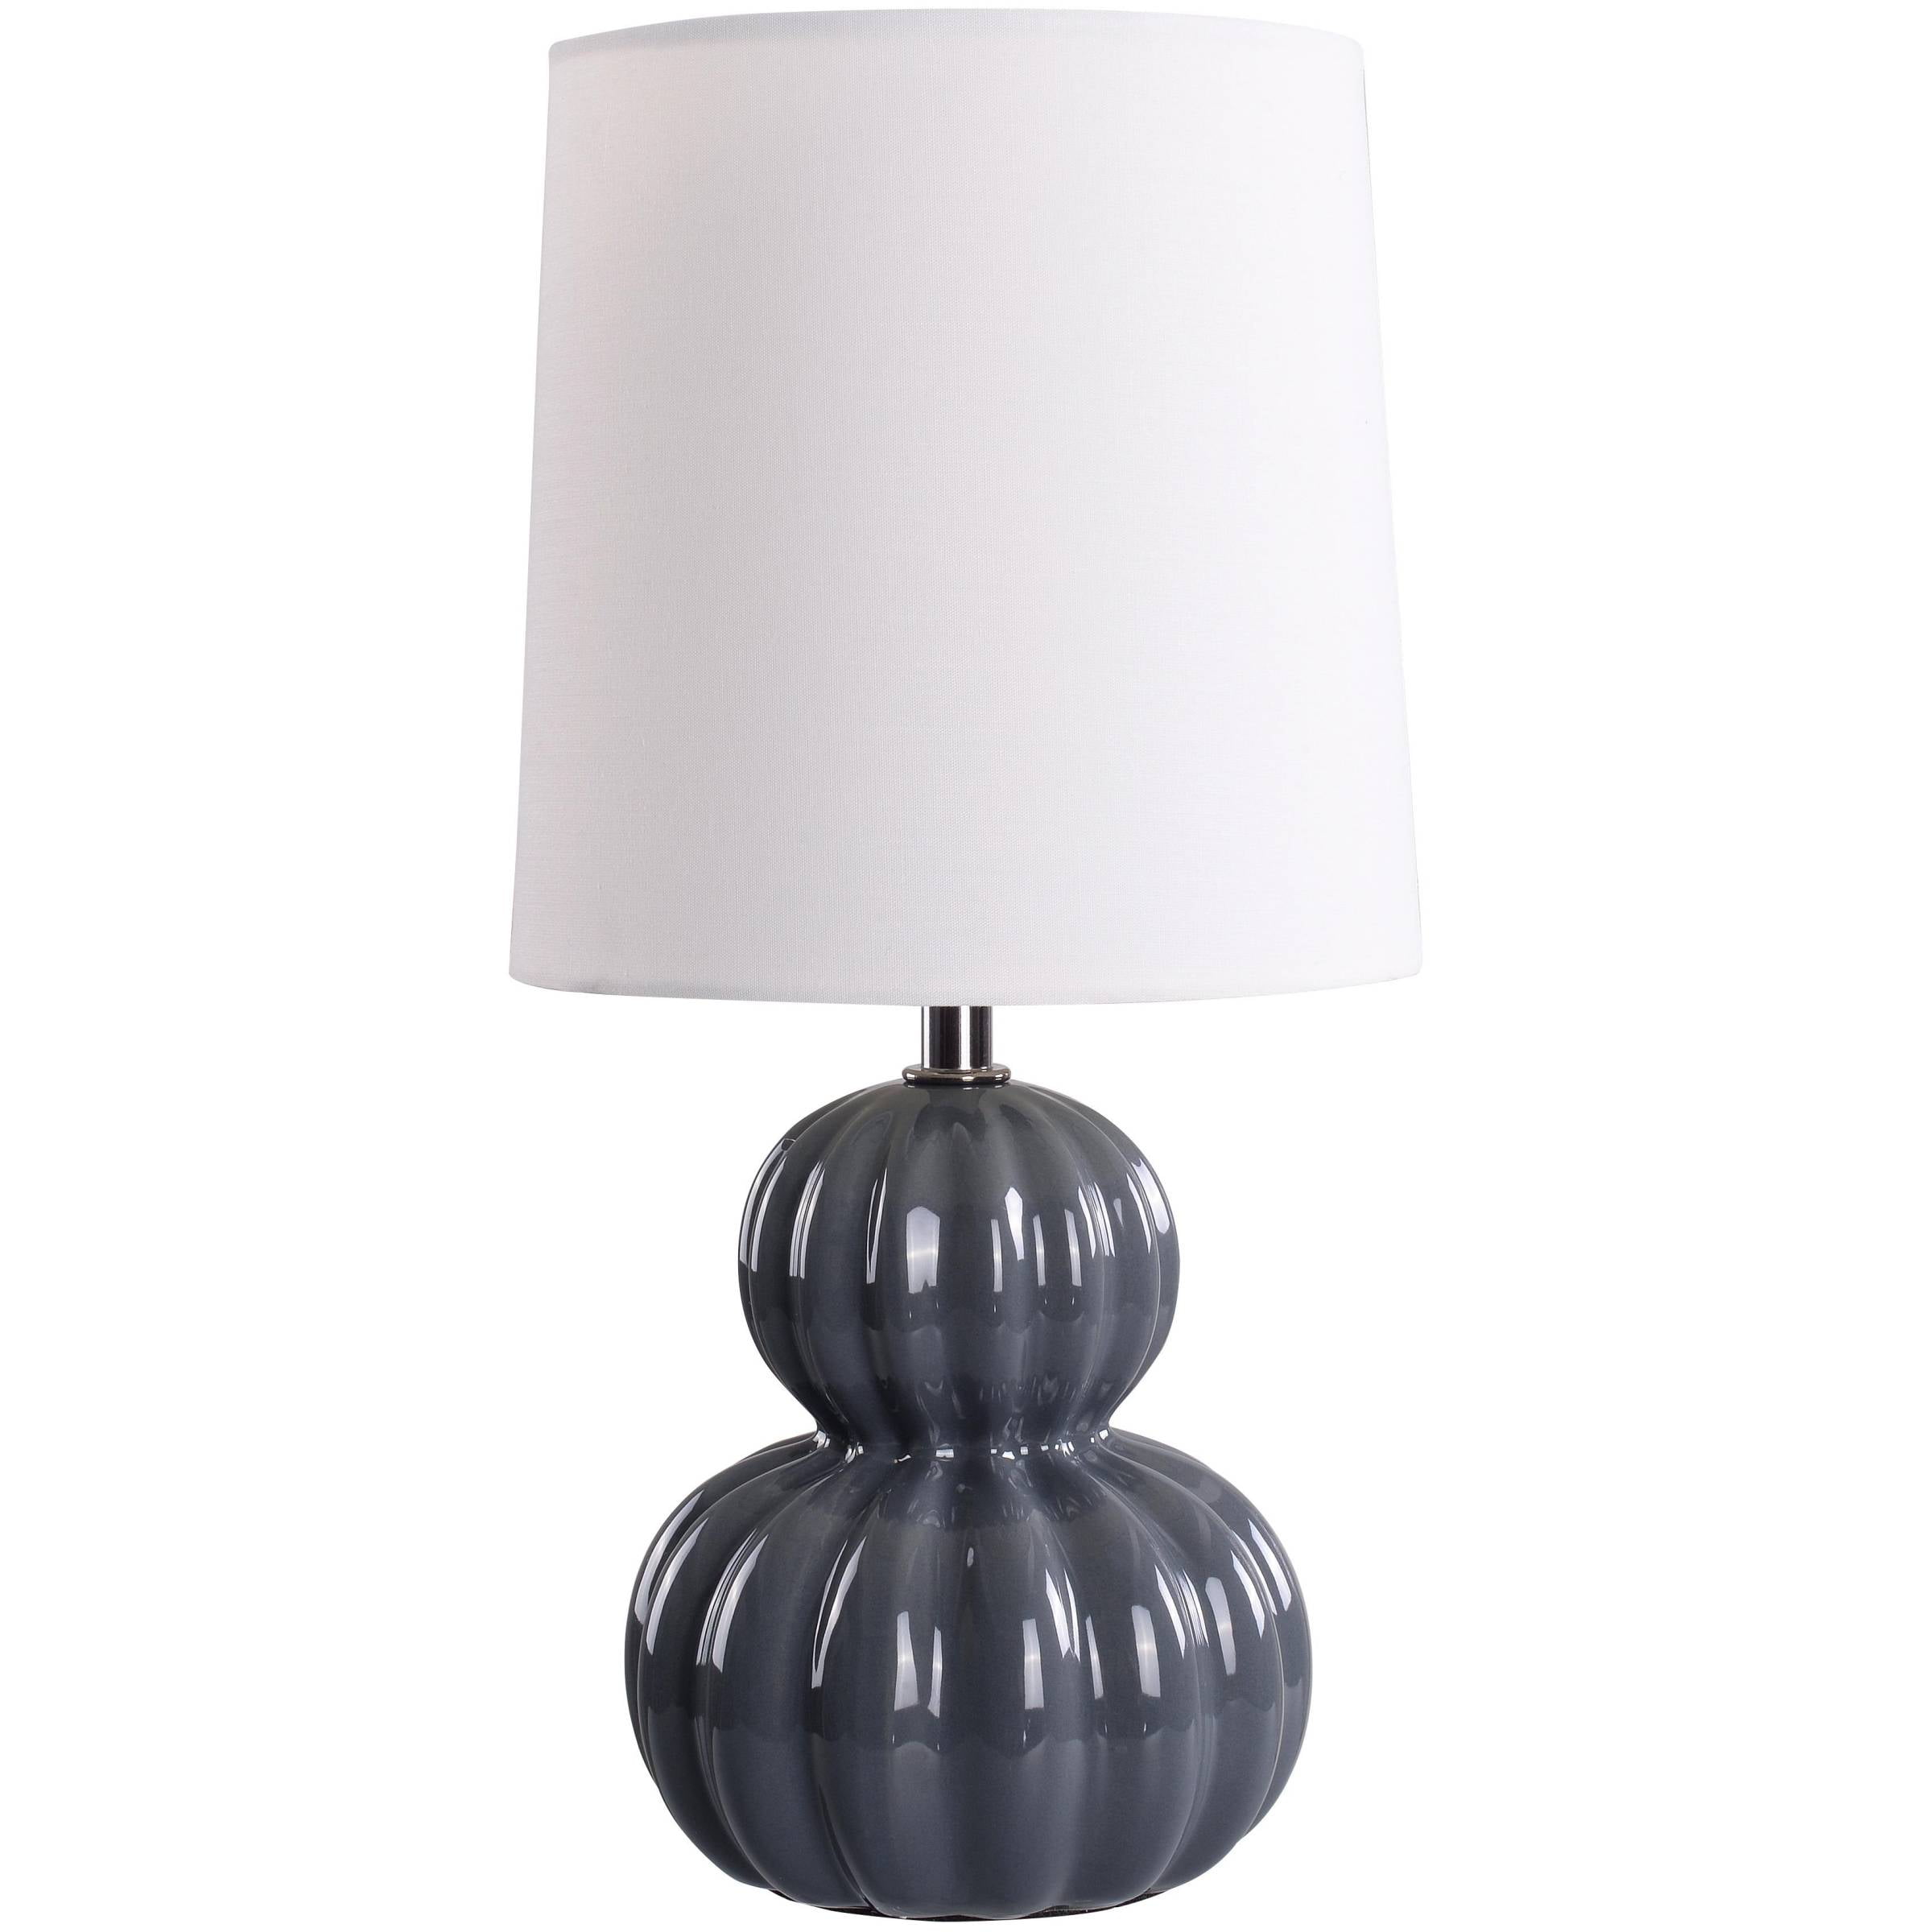 Mainstays Mini Gray Ceramic Table Lamp with Shade 12.75"H-Gray Finish and Traditional Style